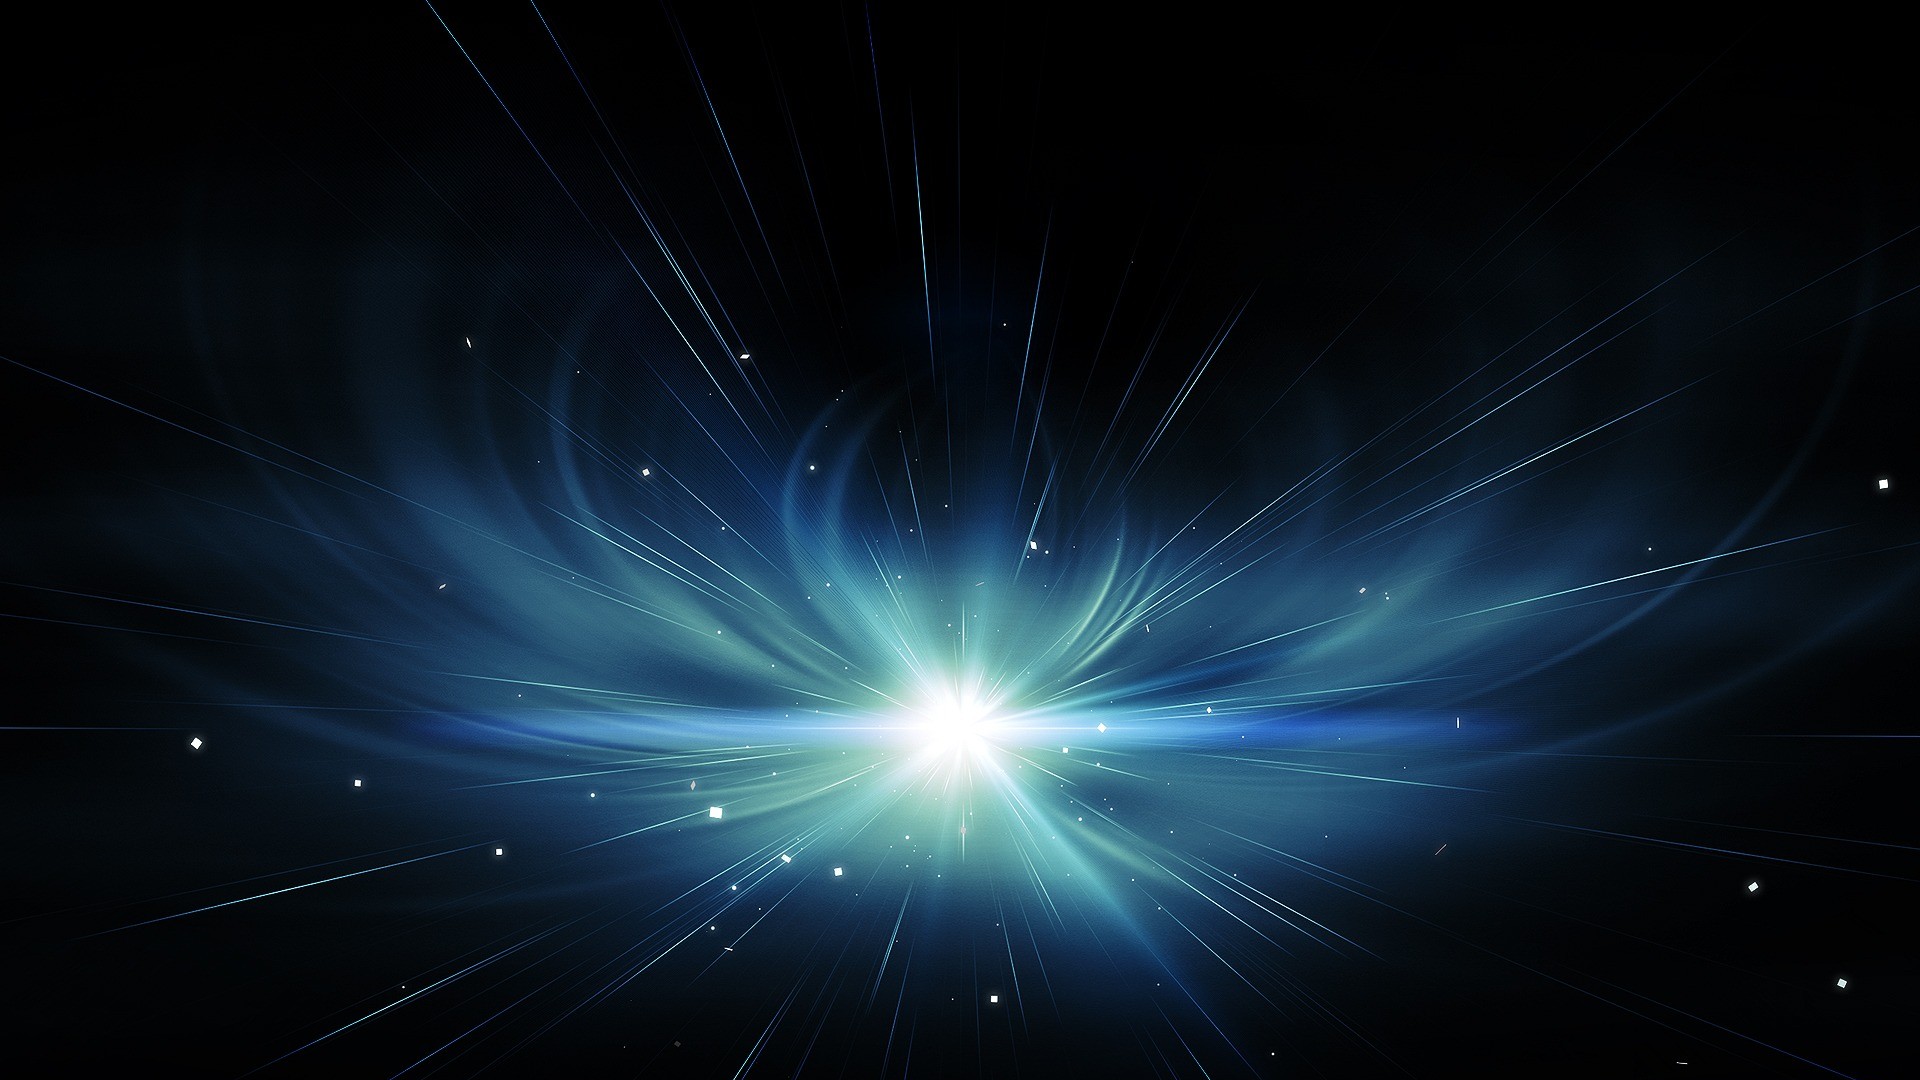 Blue Trail Explosion In Deep Space HD Image Abstract 3d